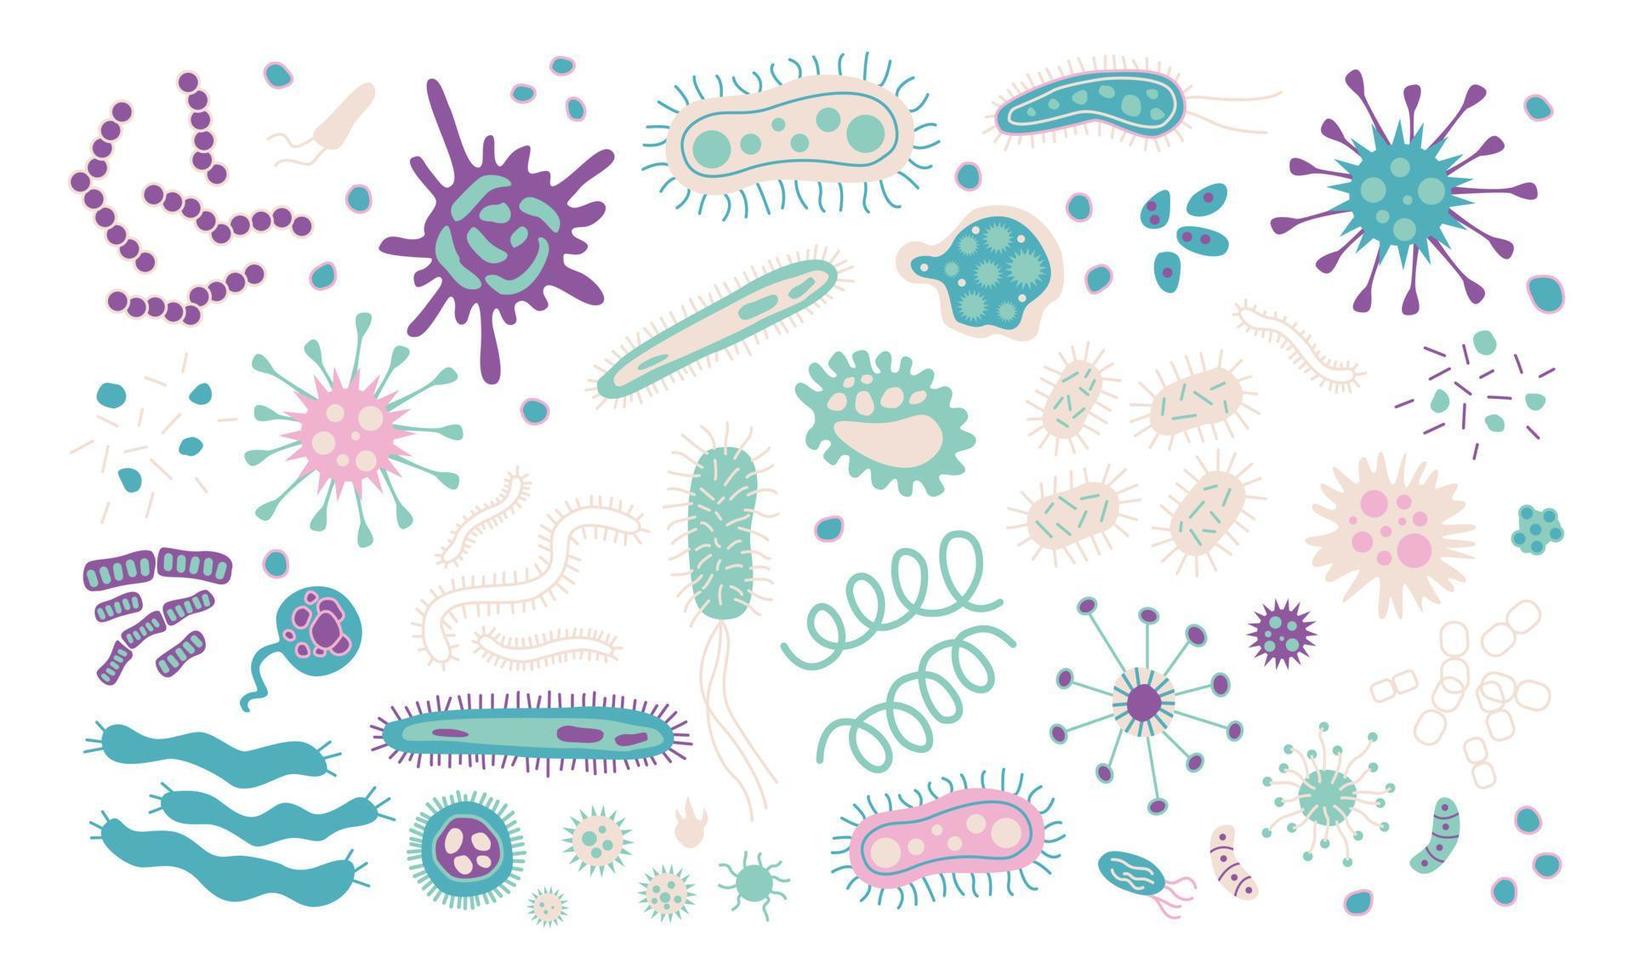 Set of different bundle of infectious microorganisms in blue, pink. Cartoon collection of infectious germs, protests, microbes. Bunch of diseases, cause bacteria, viruses. Hand drawn flat illustration vector